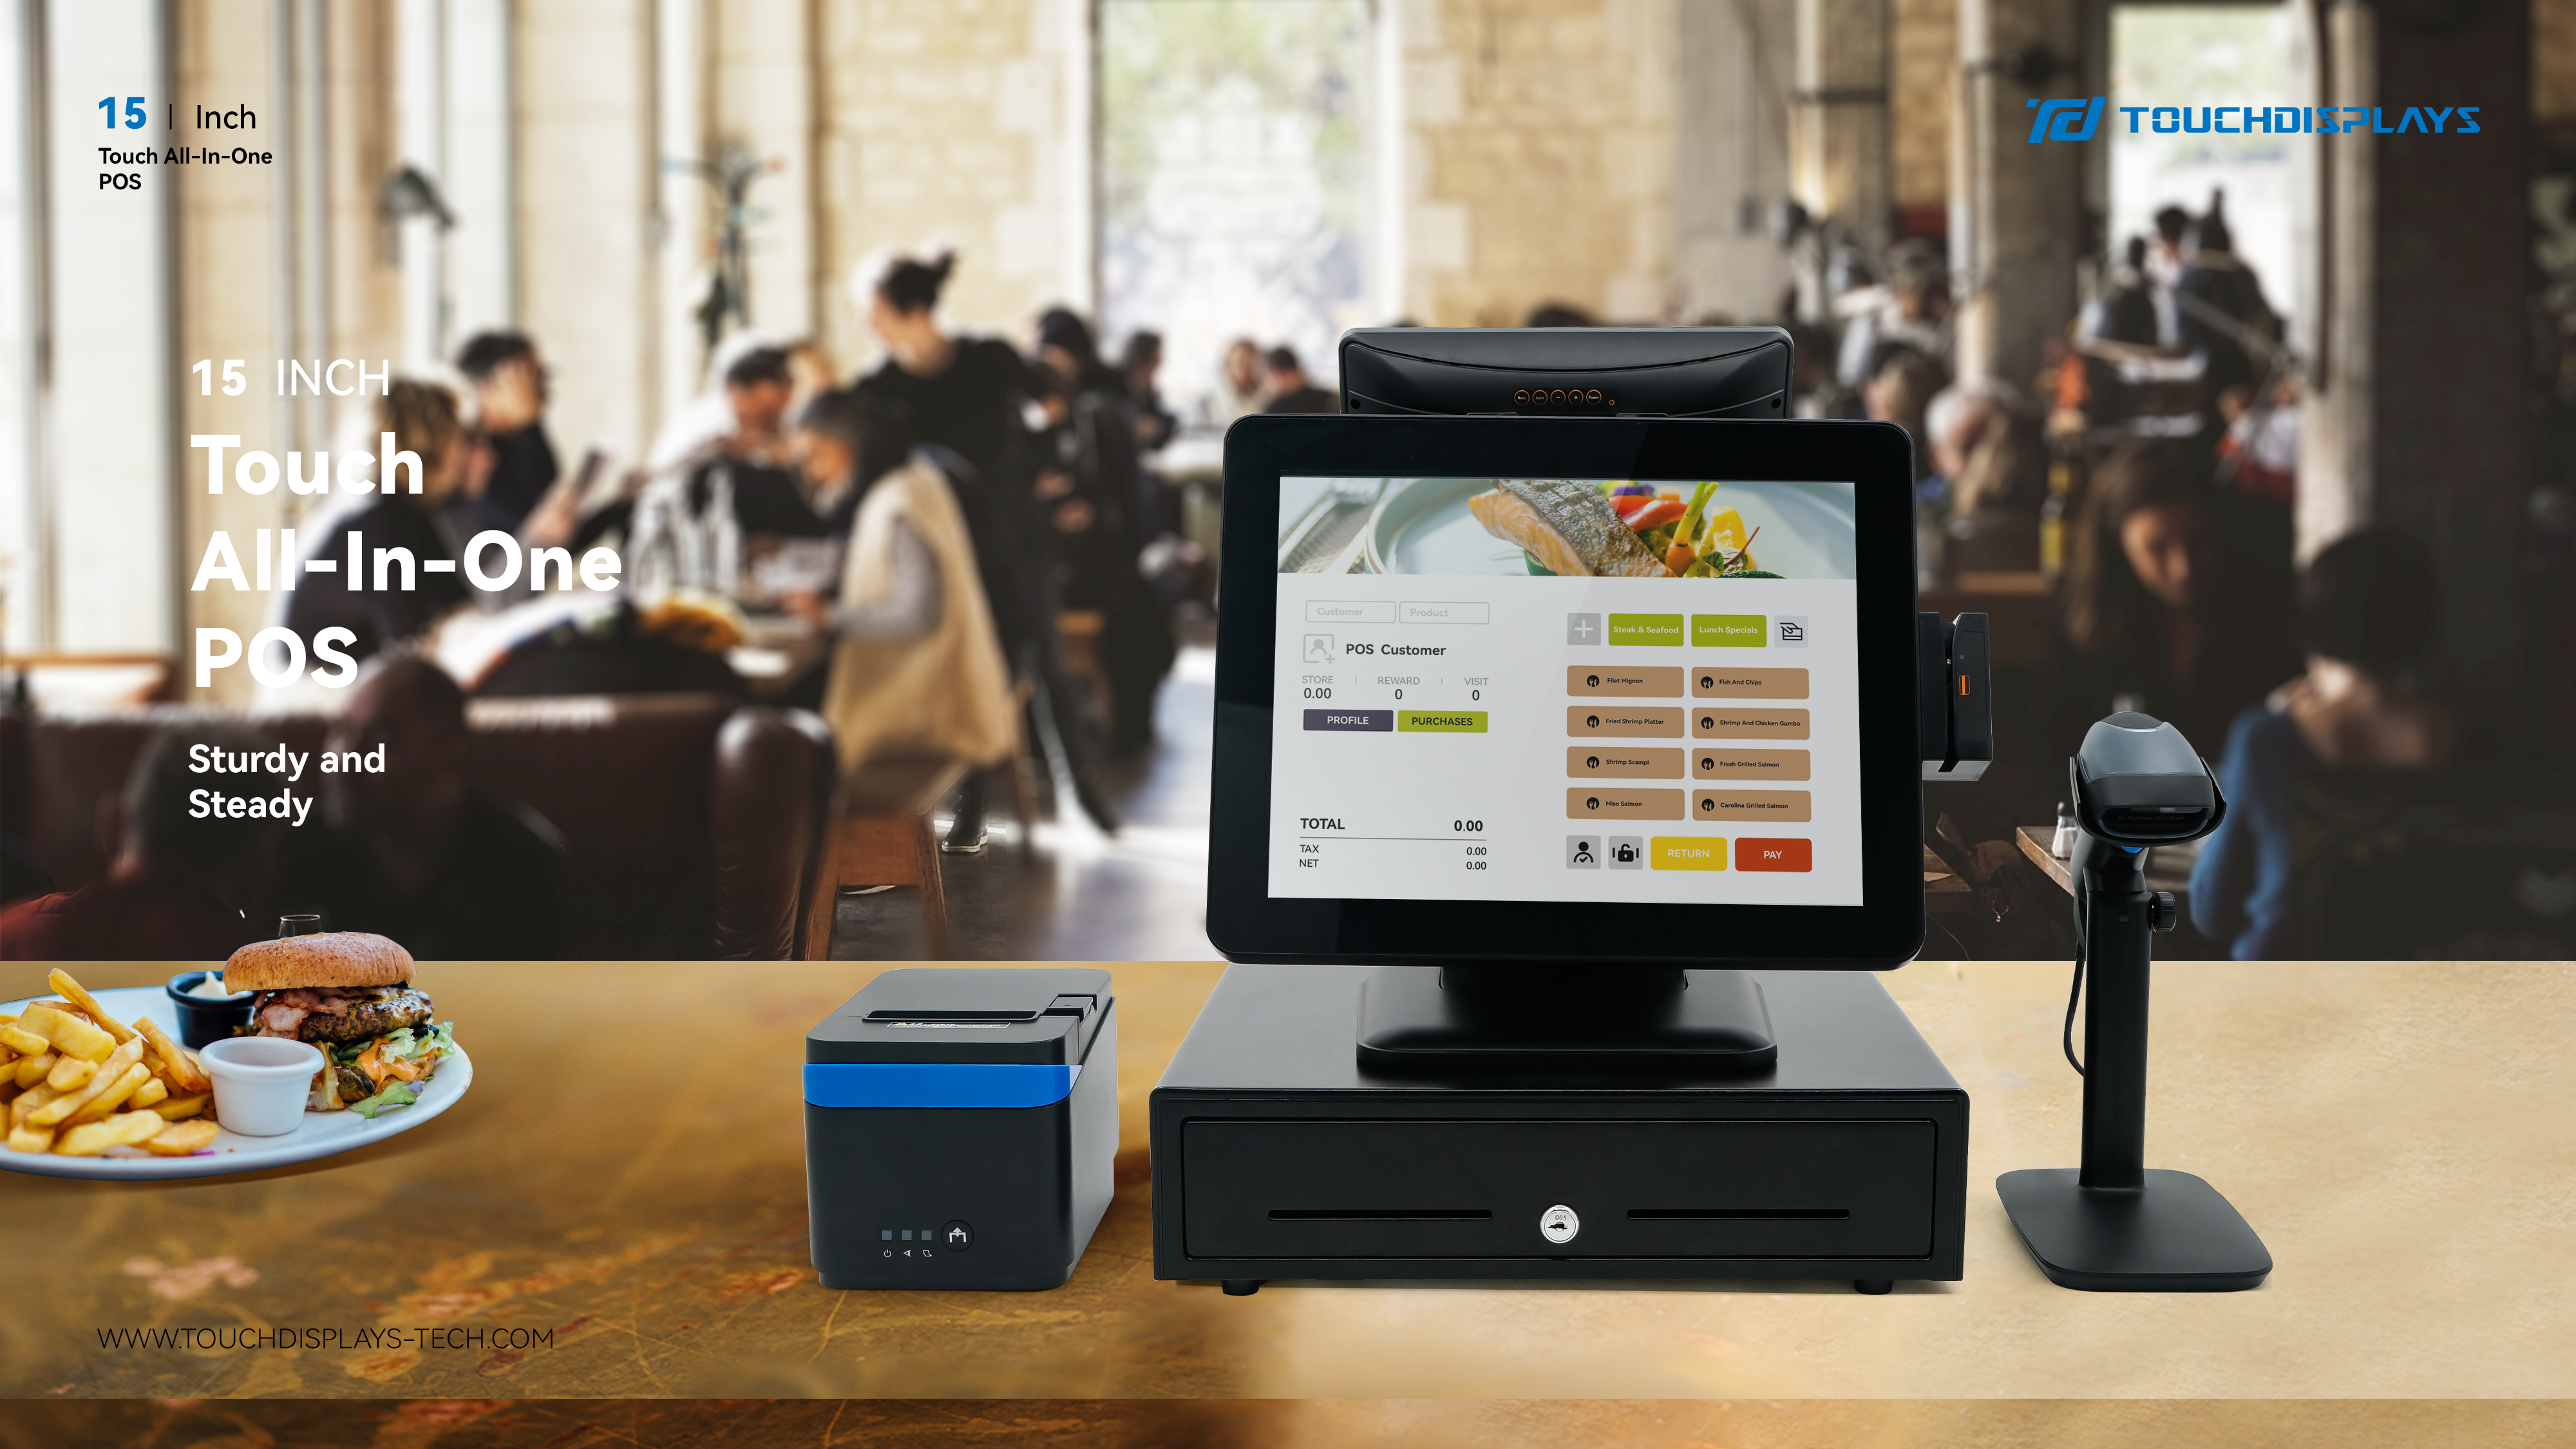 Fast Food Industry Applies Self-service Kiosks  to Improve Service Quality and Establish Customer Loyalty